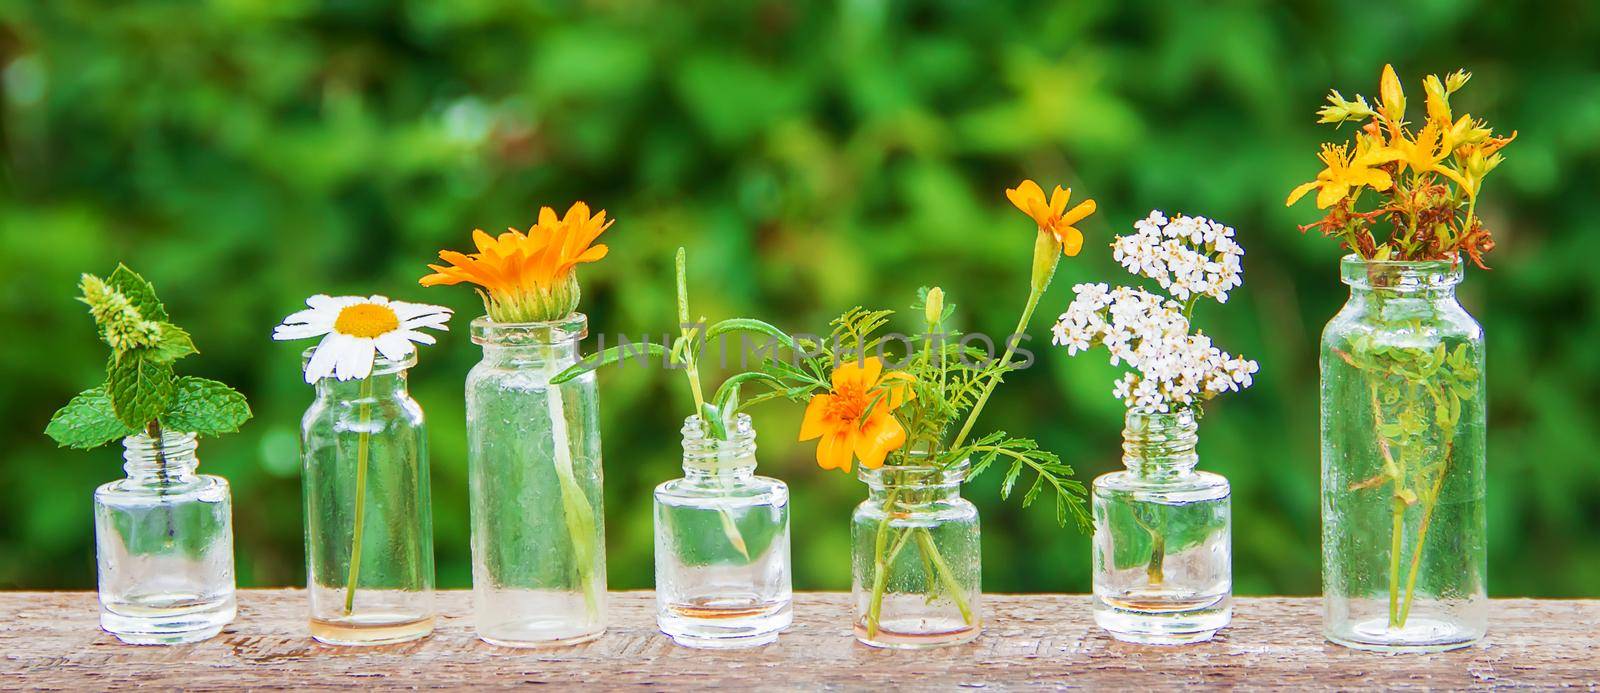 extracts of herbs in small bottles. Selective focus. by yanadjana